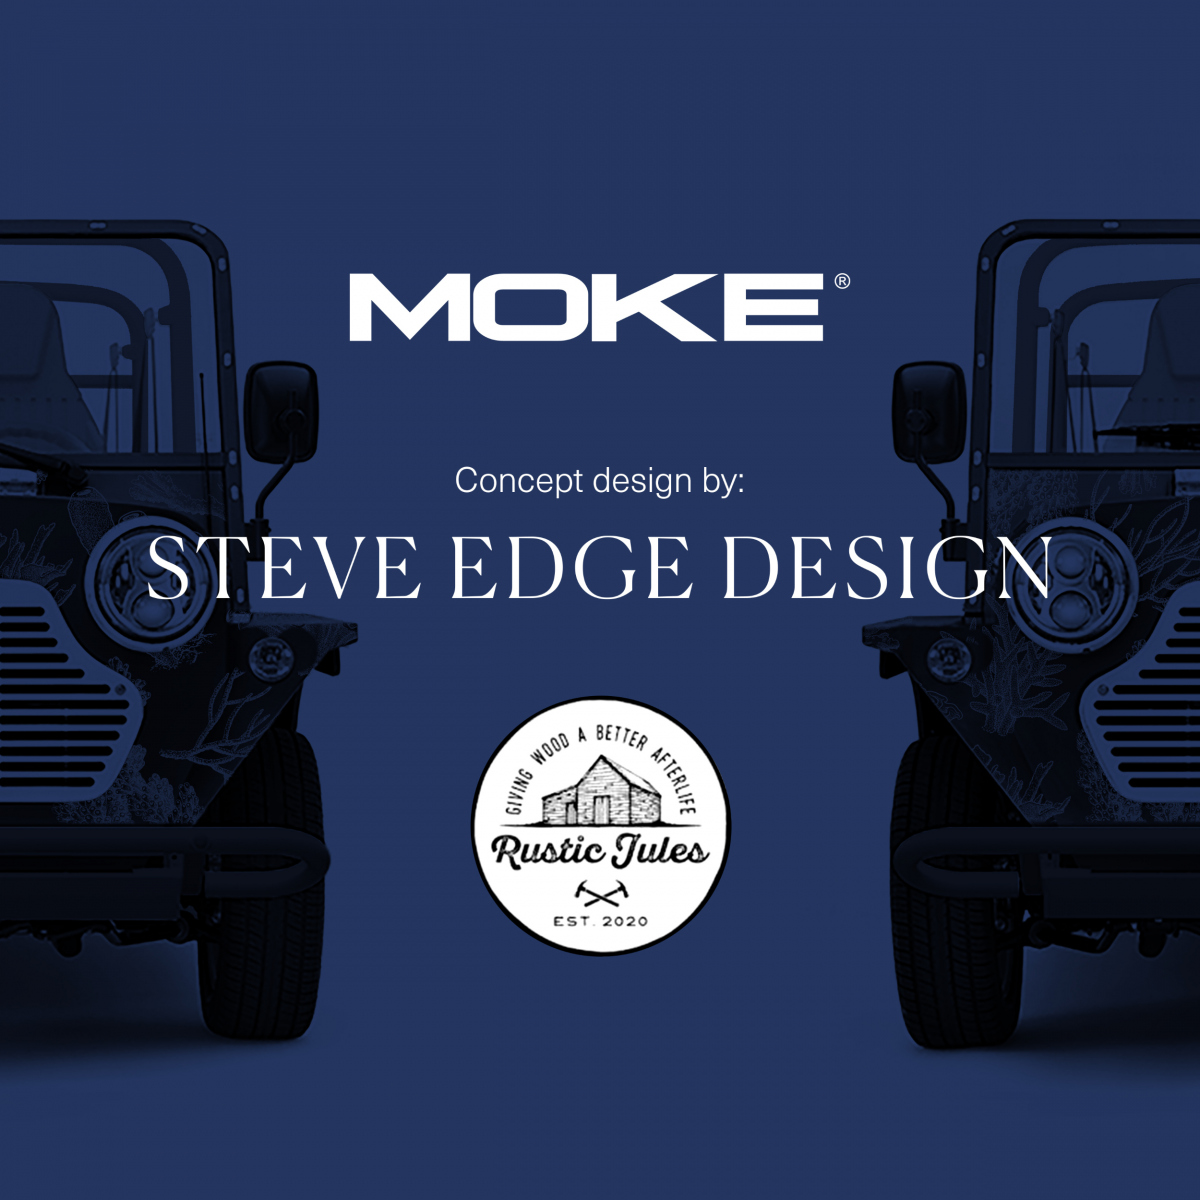 Two special edition Electric MOKEs designed by Steve Edge raise £450,000 for Blue Marine Foundation at Monaco Yacht Show